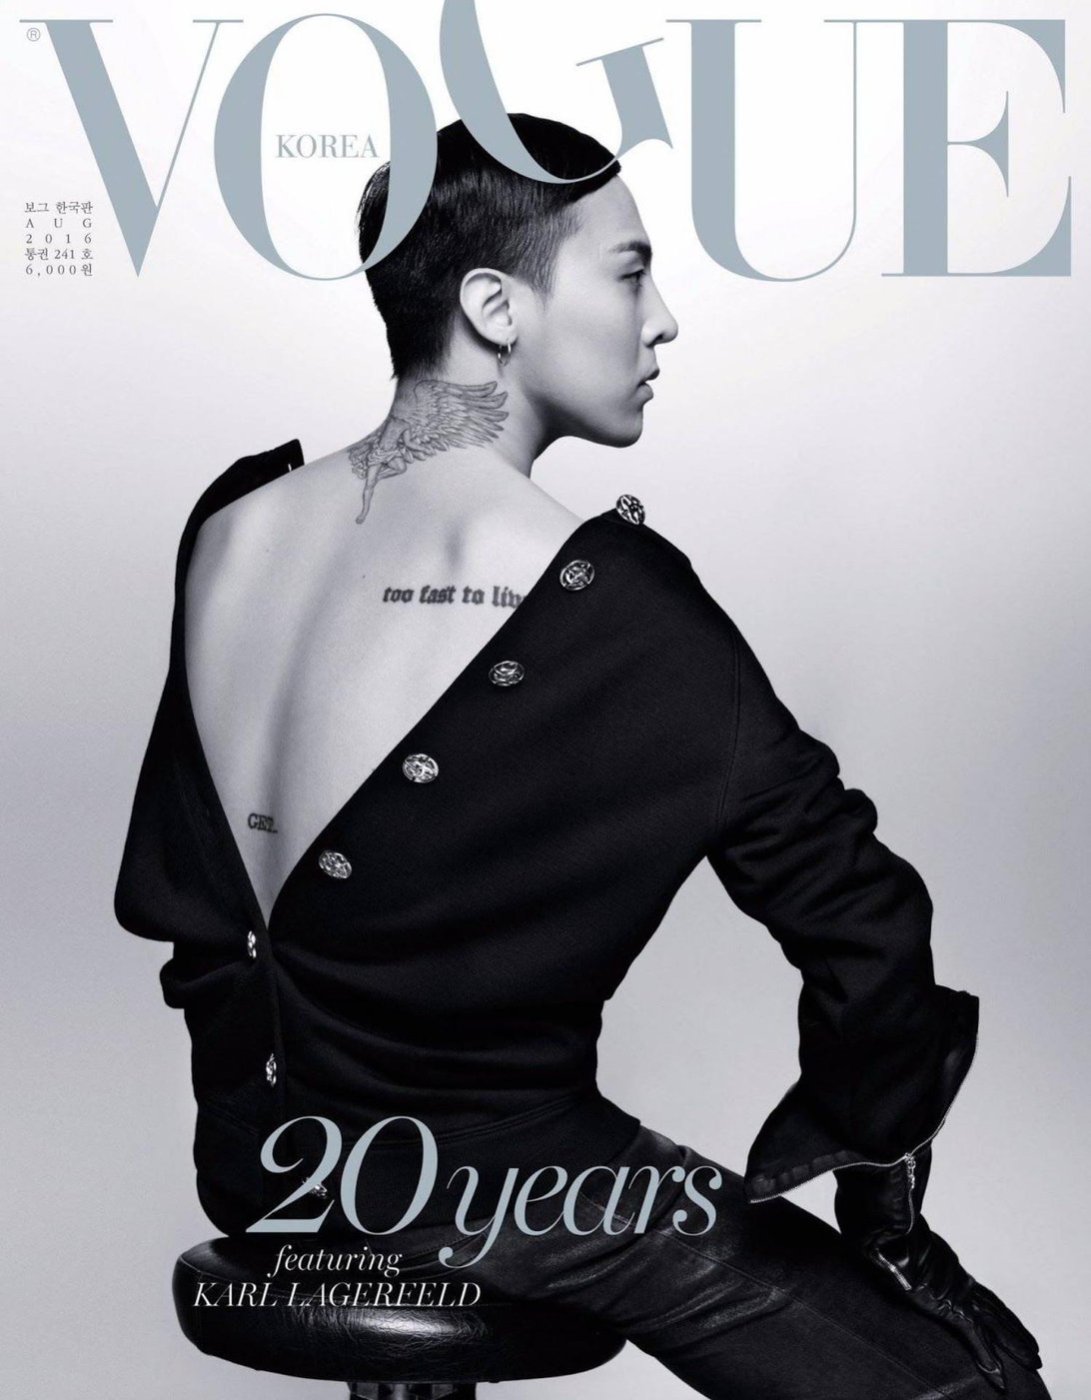 G-Dragon is the manual on X: Photo by Karl Lagerfeld 📸💯✔️. #GDRAGON  #GDRAGONxVOGUE #vogue #Chanel love this cover  / X